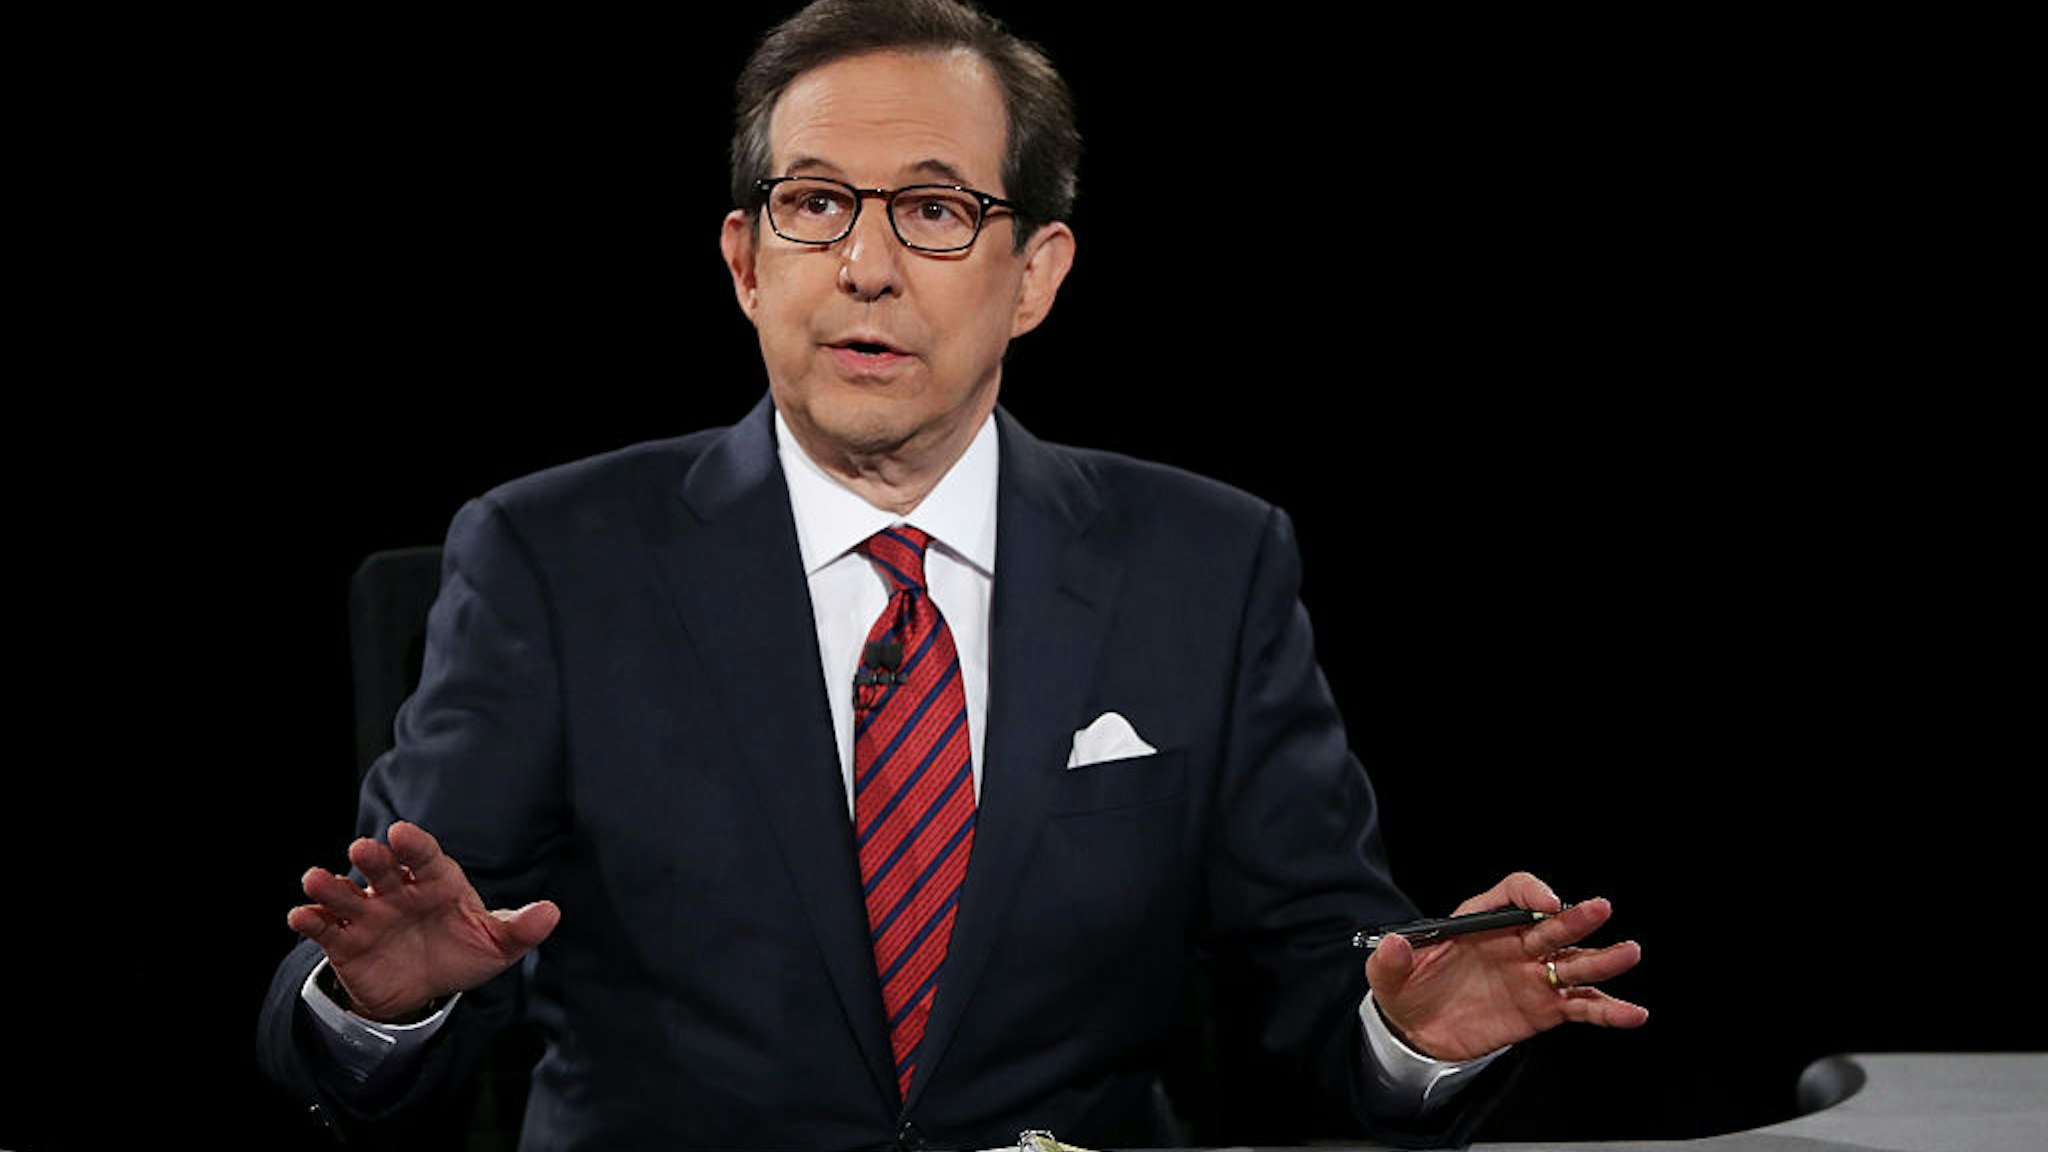 Fox News anchor and moderator Chris Wallace asks the candidates a question during the third U.S. presidential debate at the Thomas &amp; Mack Center on October 19, 2016 in Las Vegas, Nevada.